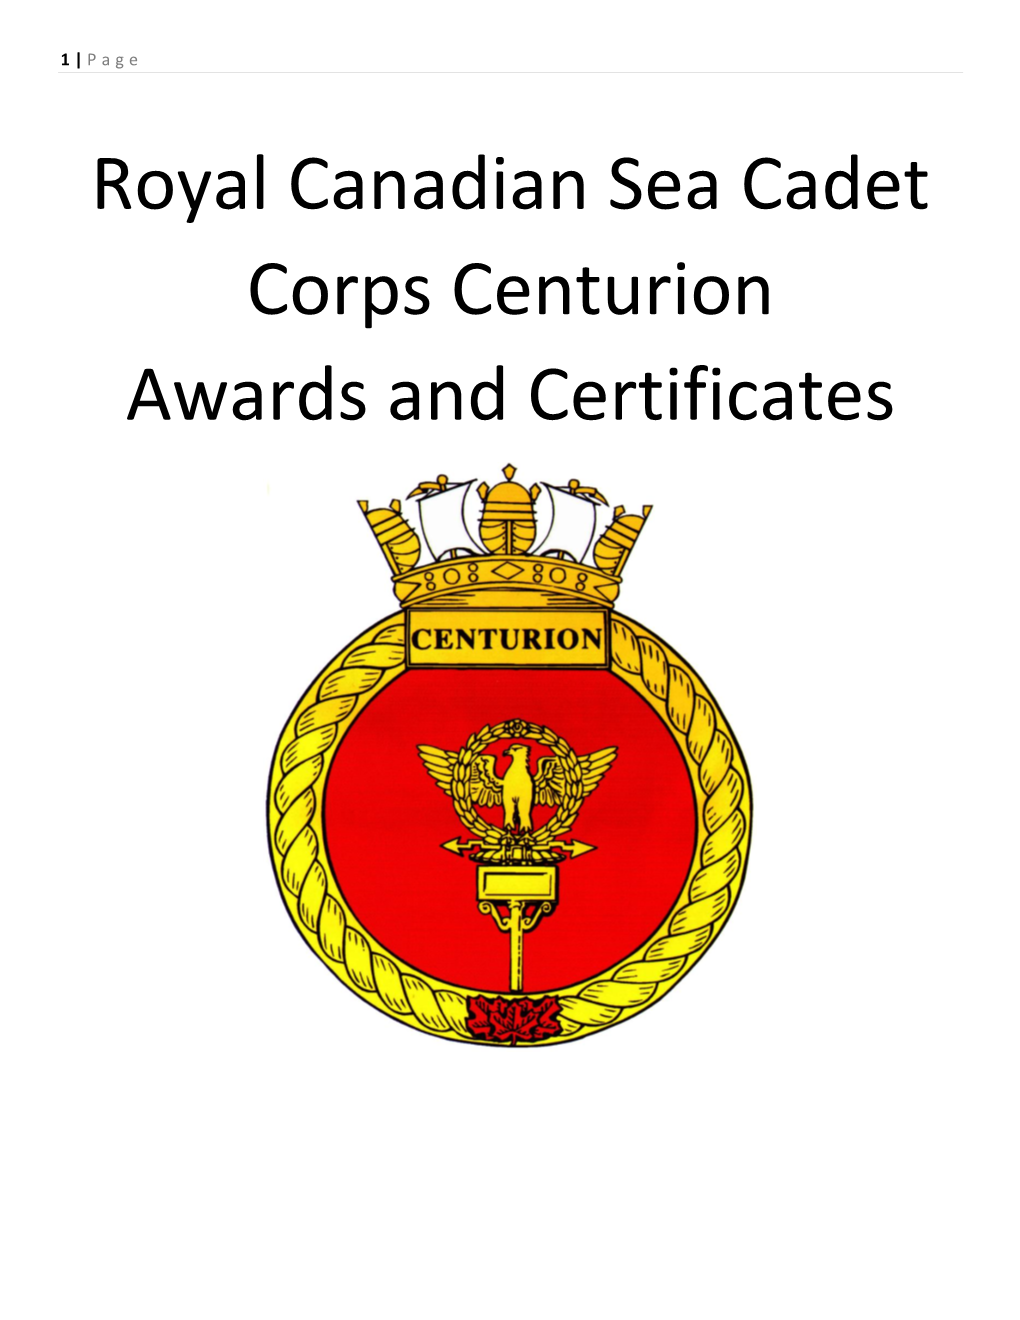 Royal Canadian Sea Cadet Corps Centurion Awards and Certificates